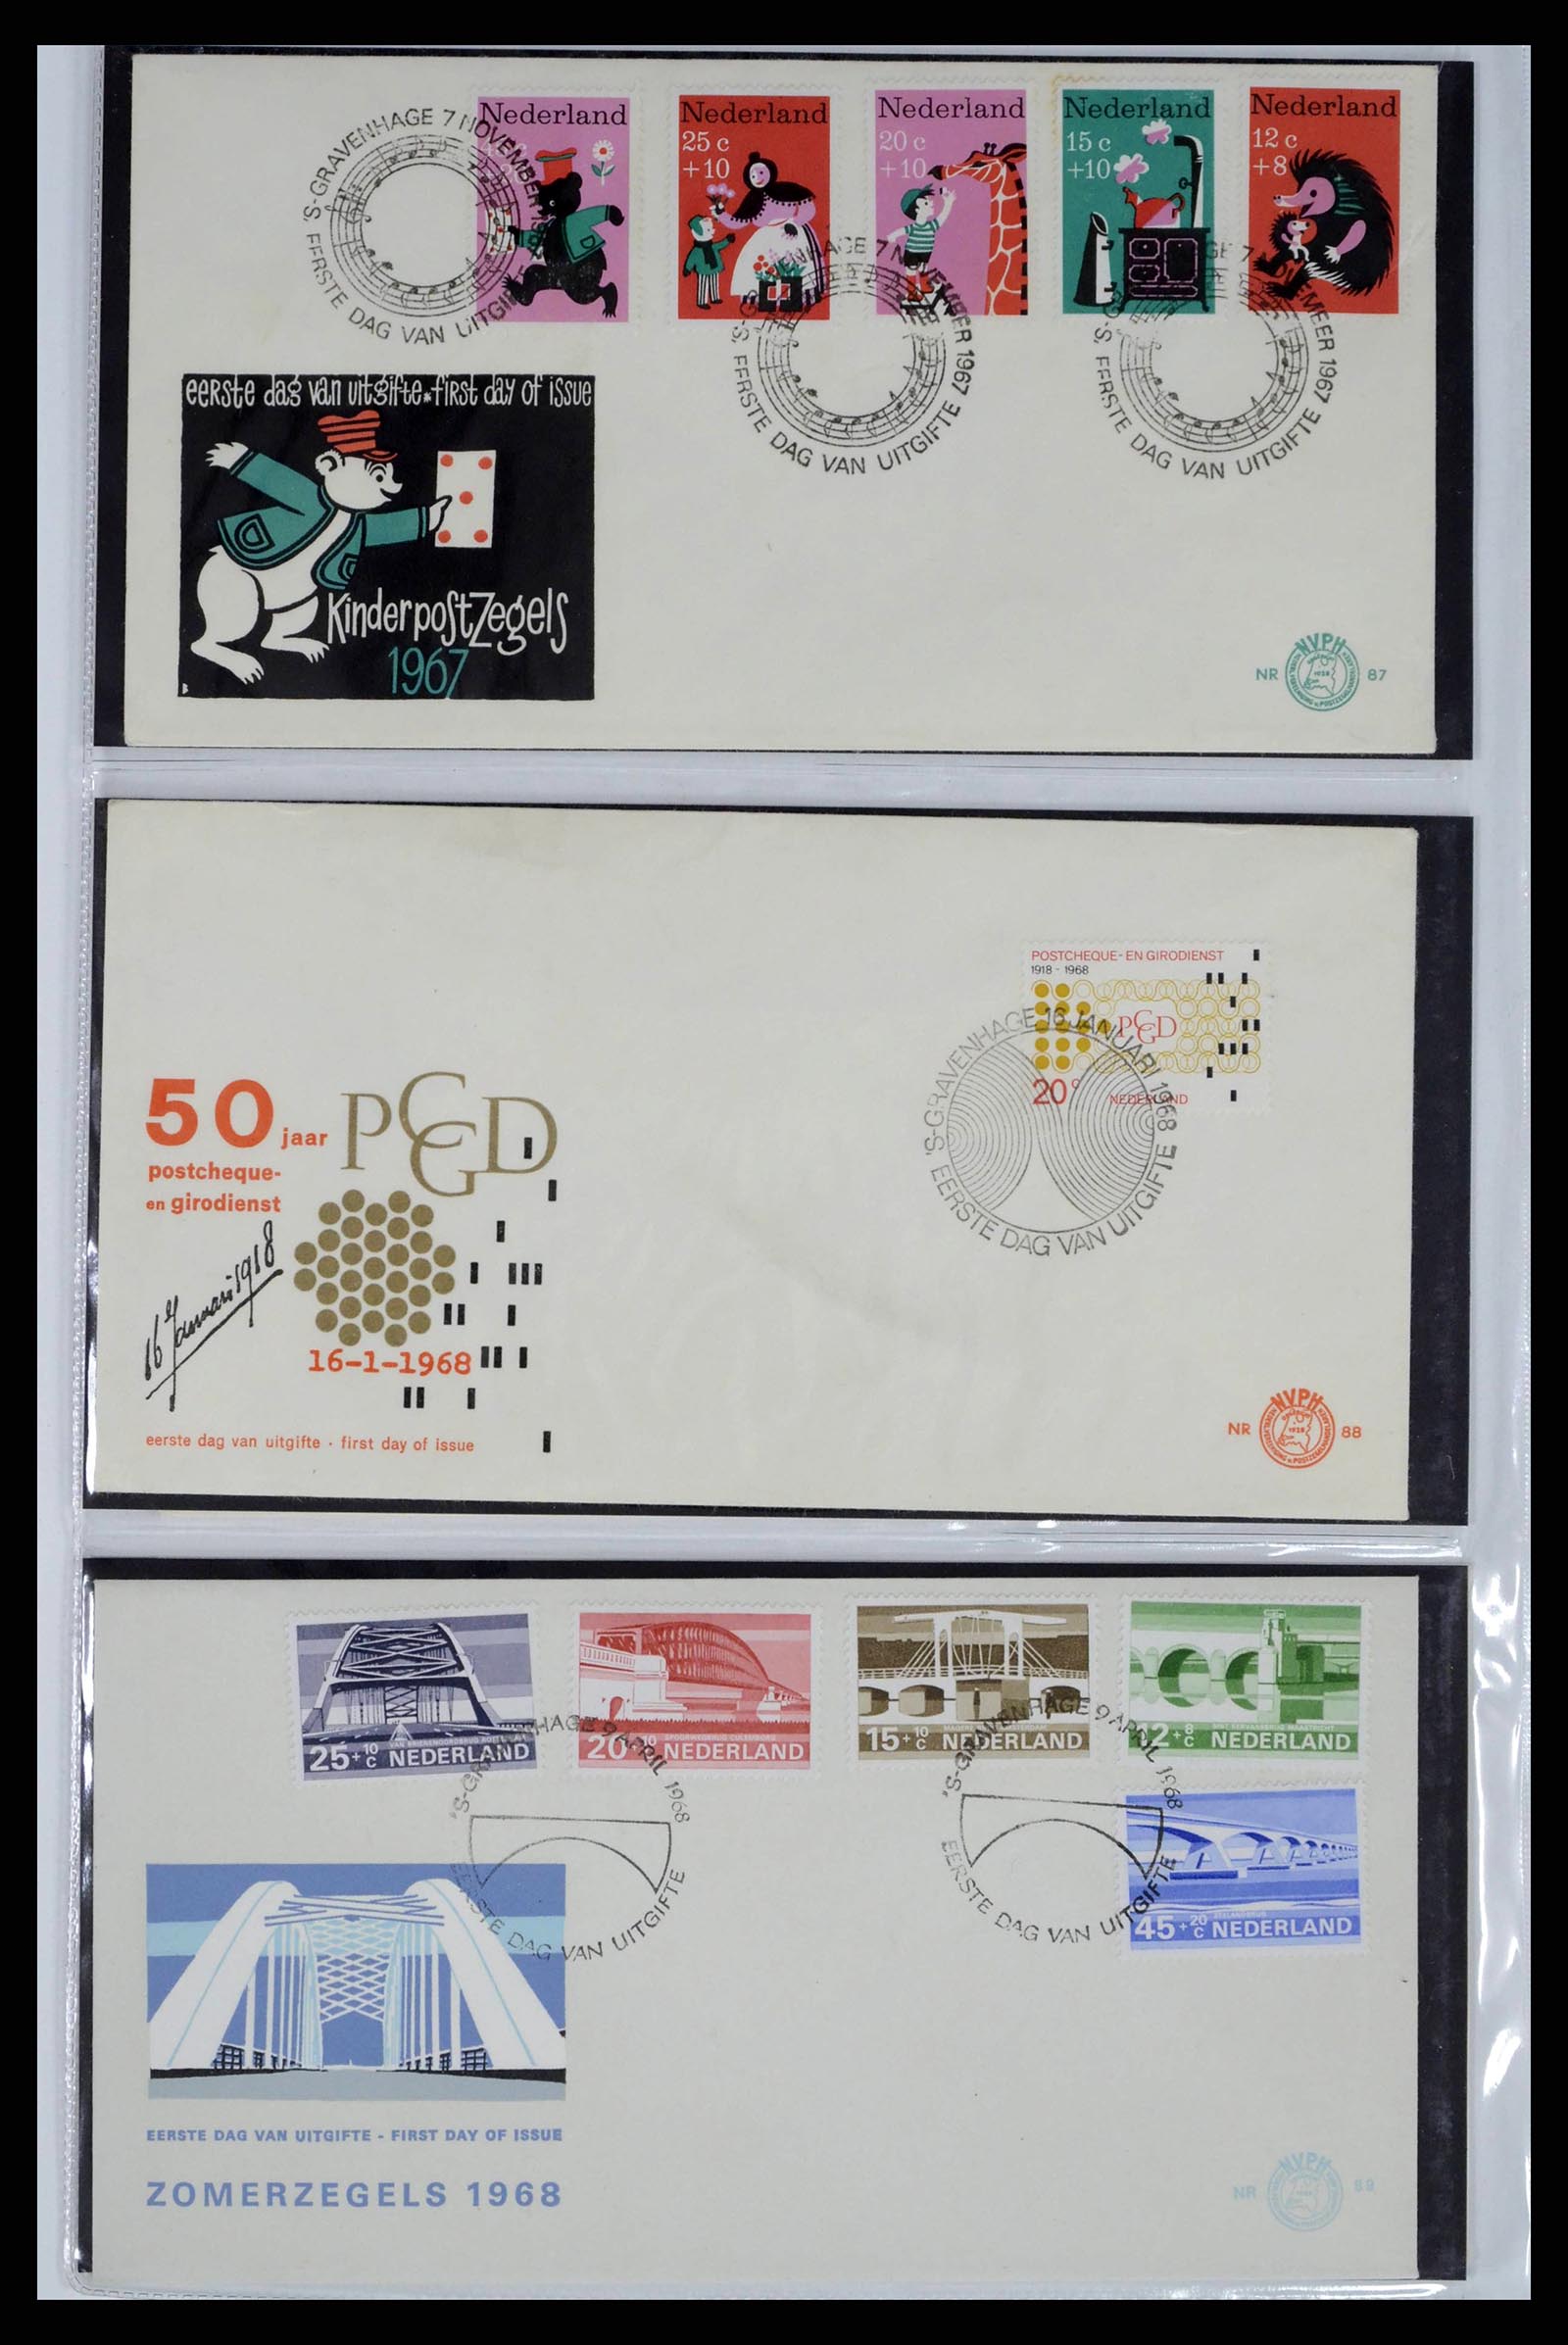 38271 0030 - Stamp collection 38271 Netherlands FDC's 1950-1995.